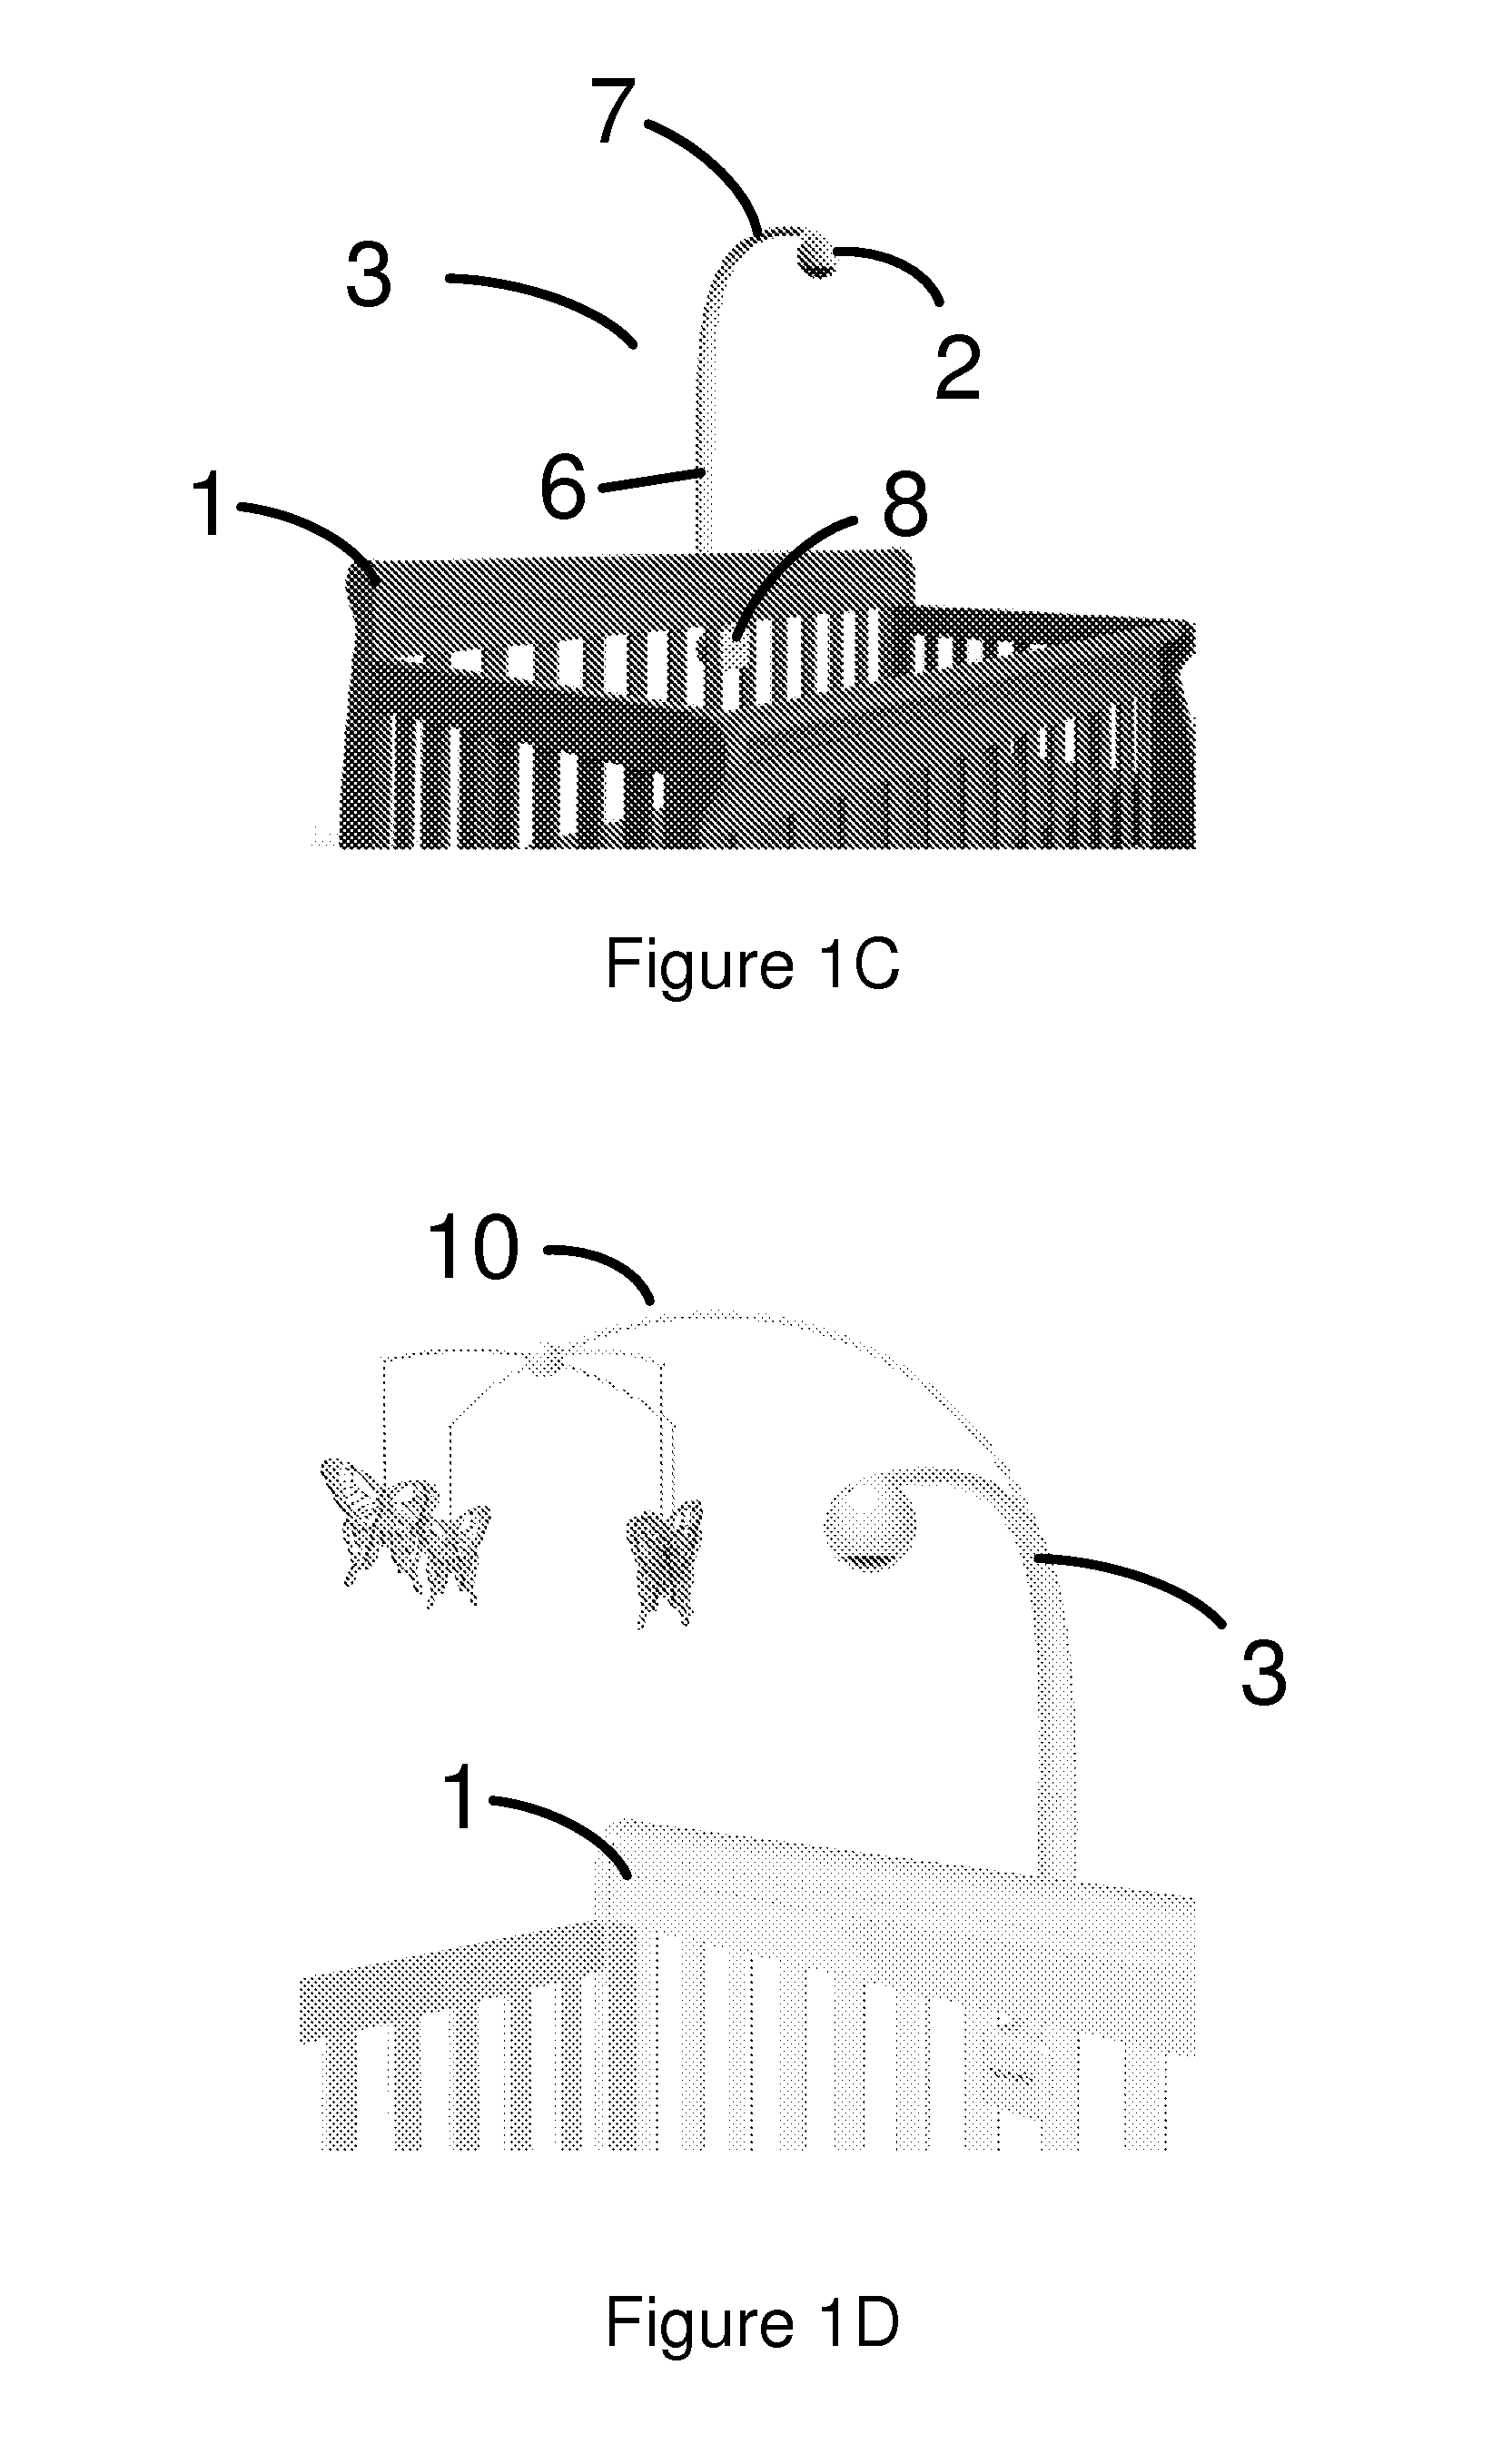 Systems and methods for configuring baby monitor cameras to provide uniform data sets for analysis and to provide an advantageous view point of babies